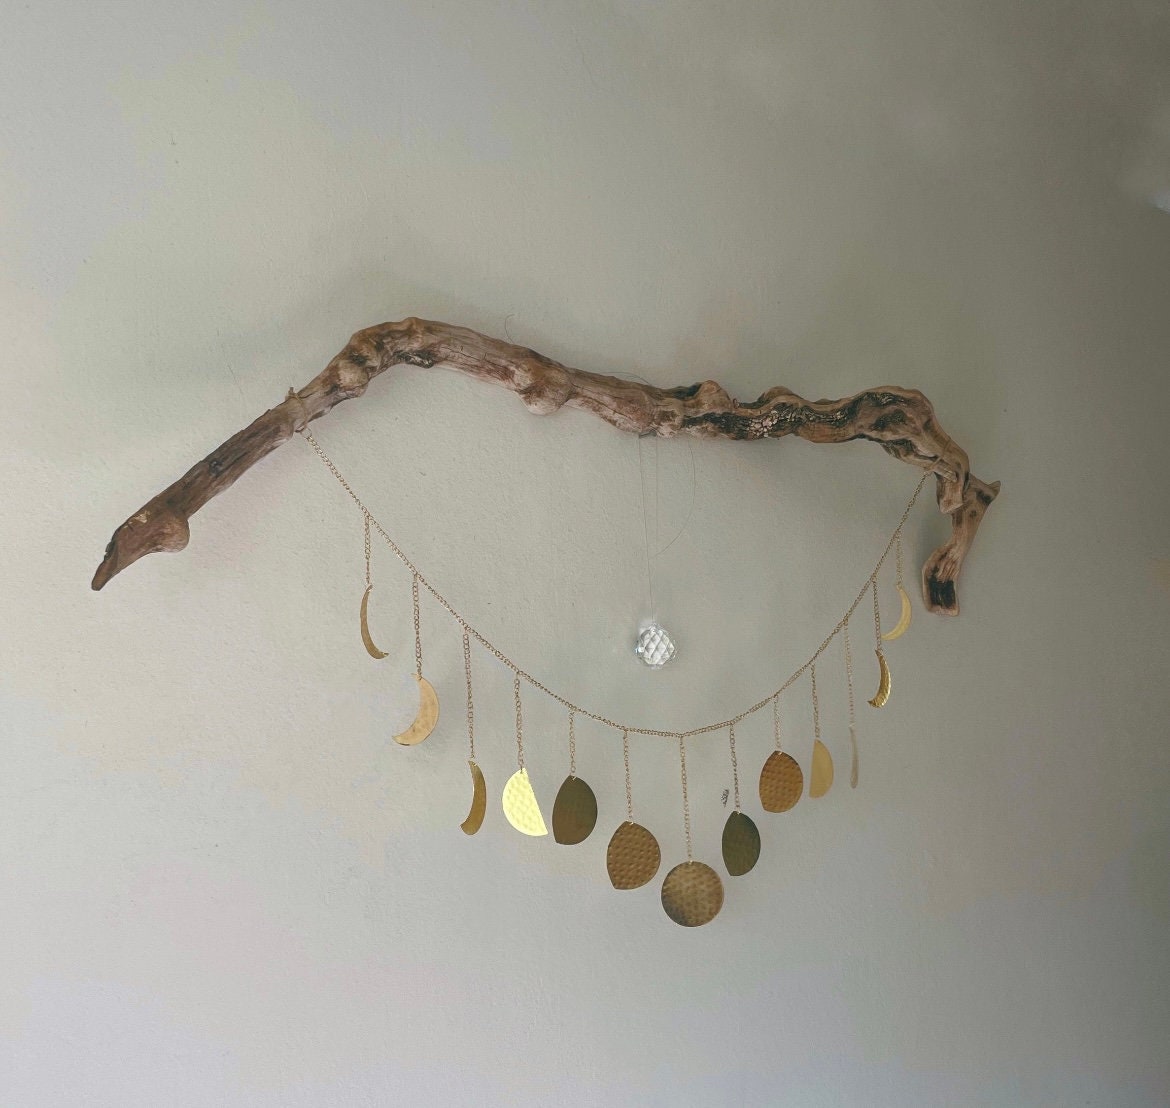 Large Boho driftwood wall hanging with sun catcher crystal and gold moons - rituel